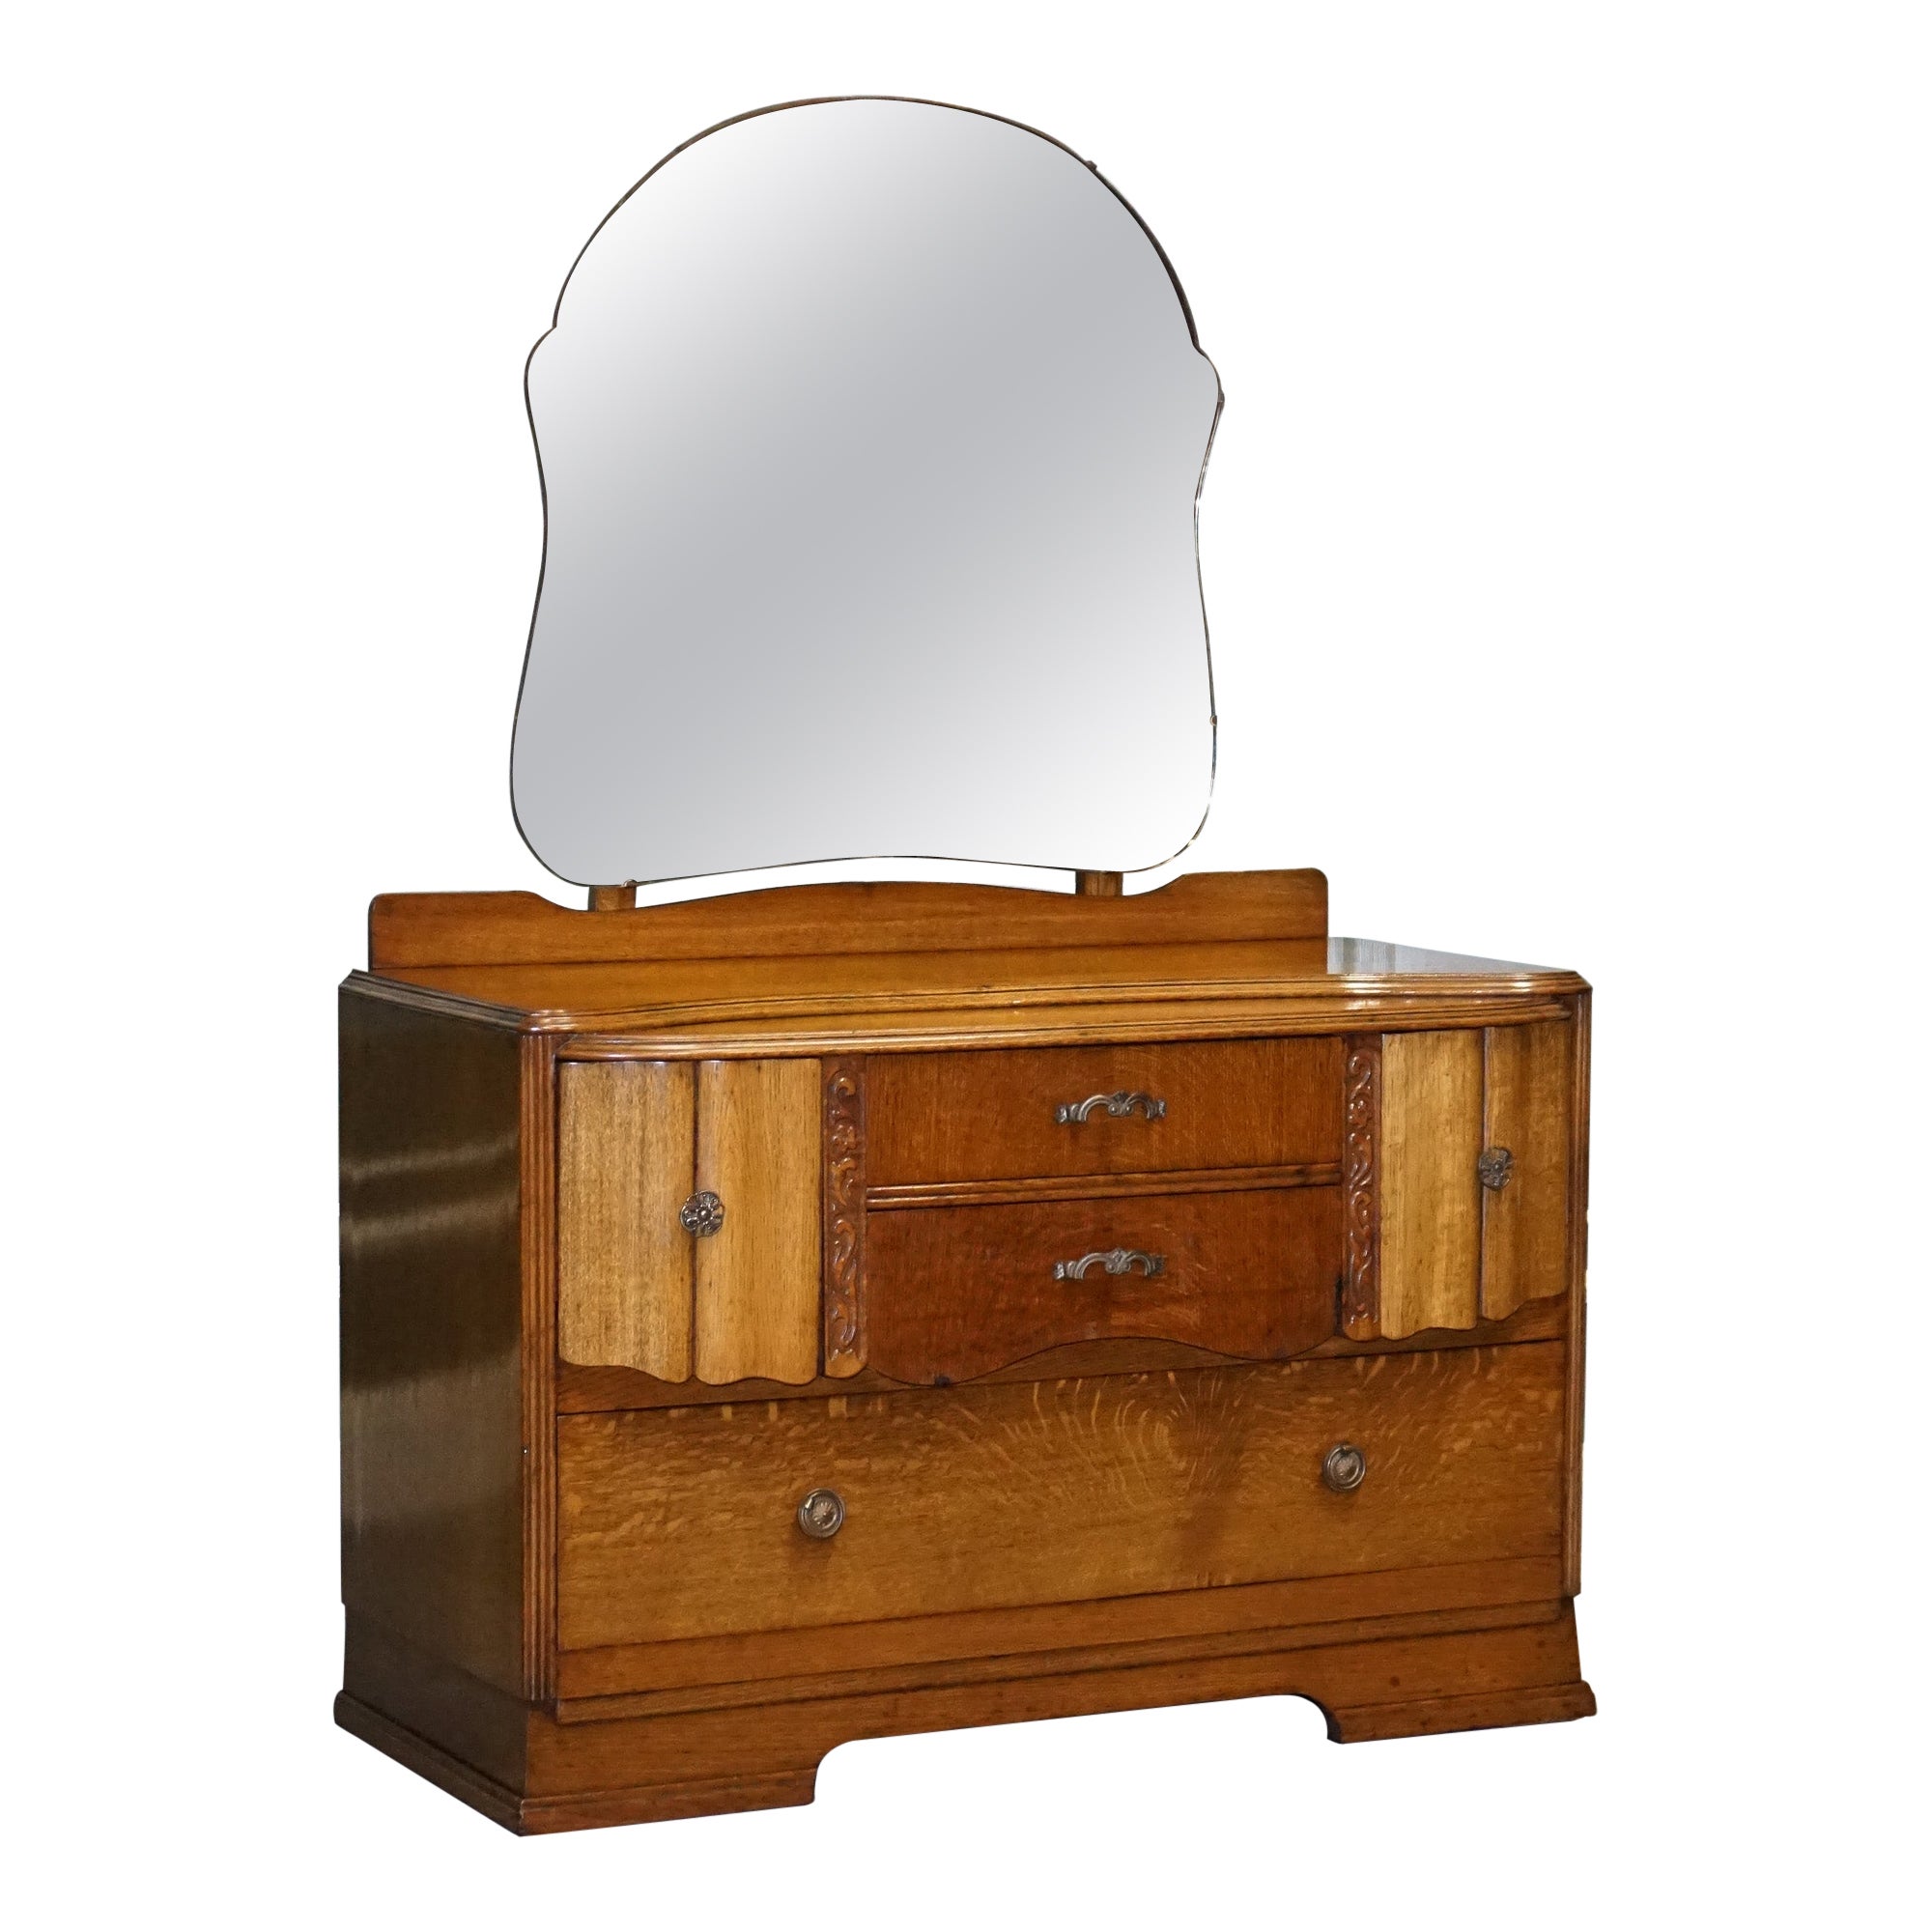 LOVELY VINTAGE ART DECO HAND CARVED OAK DRESSING TABLE WITH MiRROR For Sale